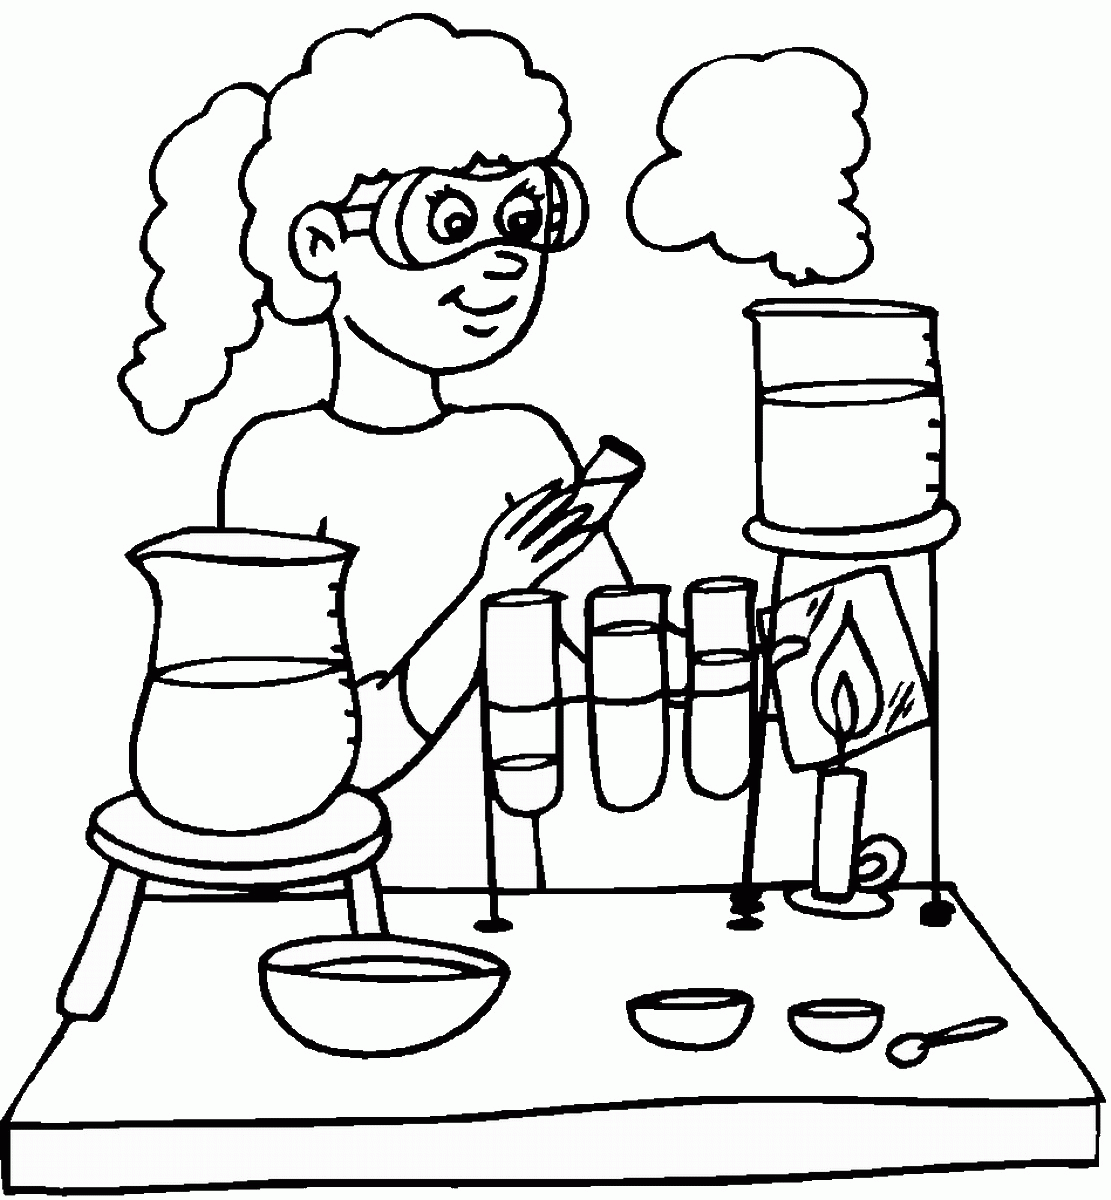 Coloring Page Science - Coloring Pages For All Ages